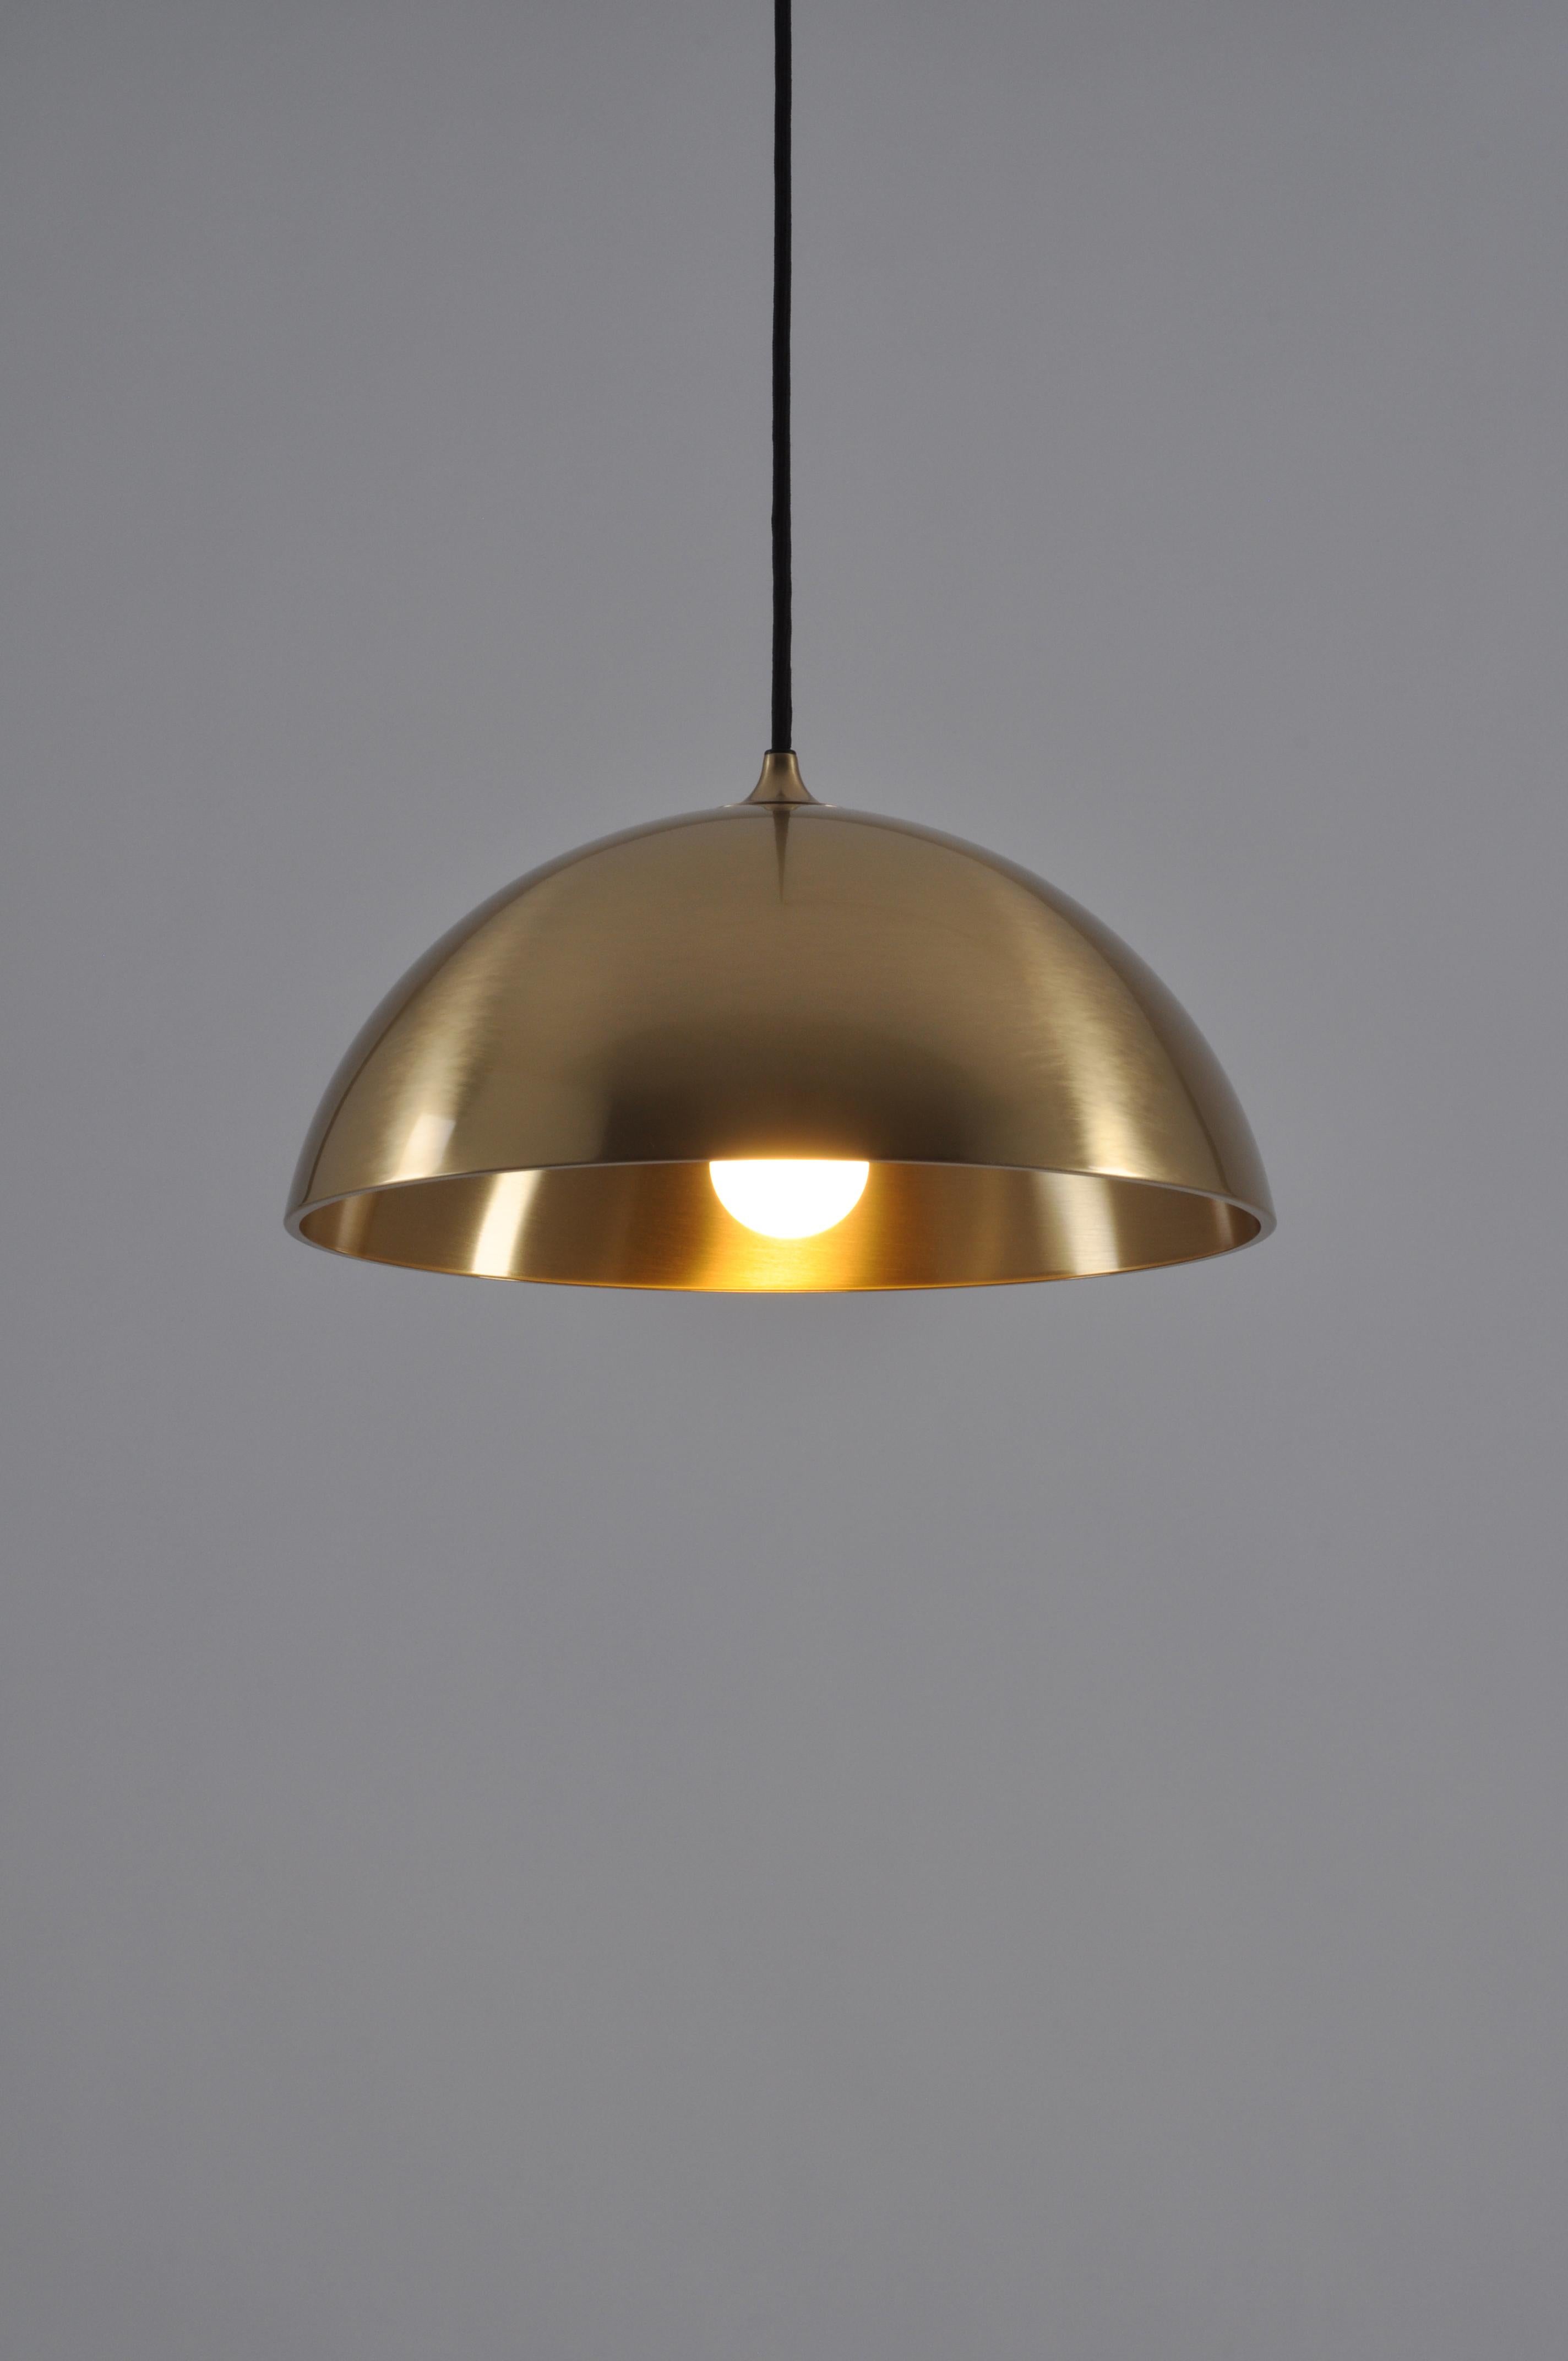 Florian Schulz Duos 36 Counterbalance Pendant Lamp in Polished Brass or nickel In Excellent Condition For Sale In Berlin, DE